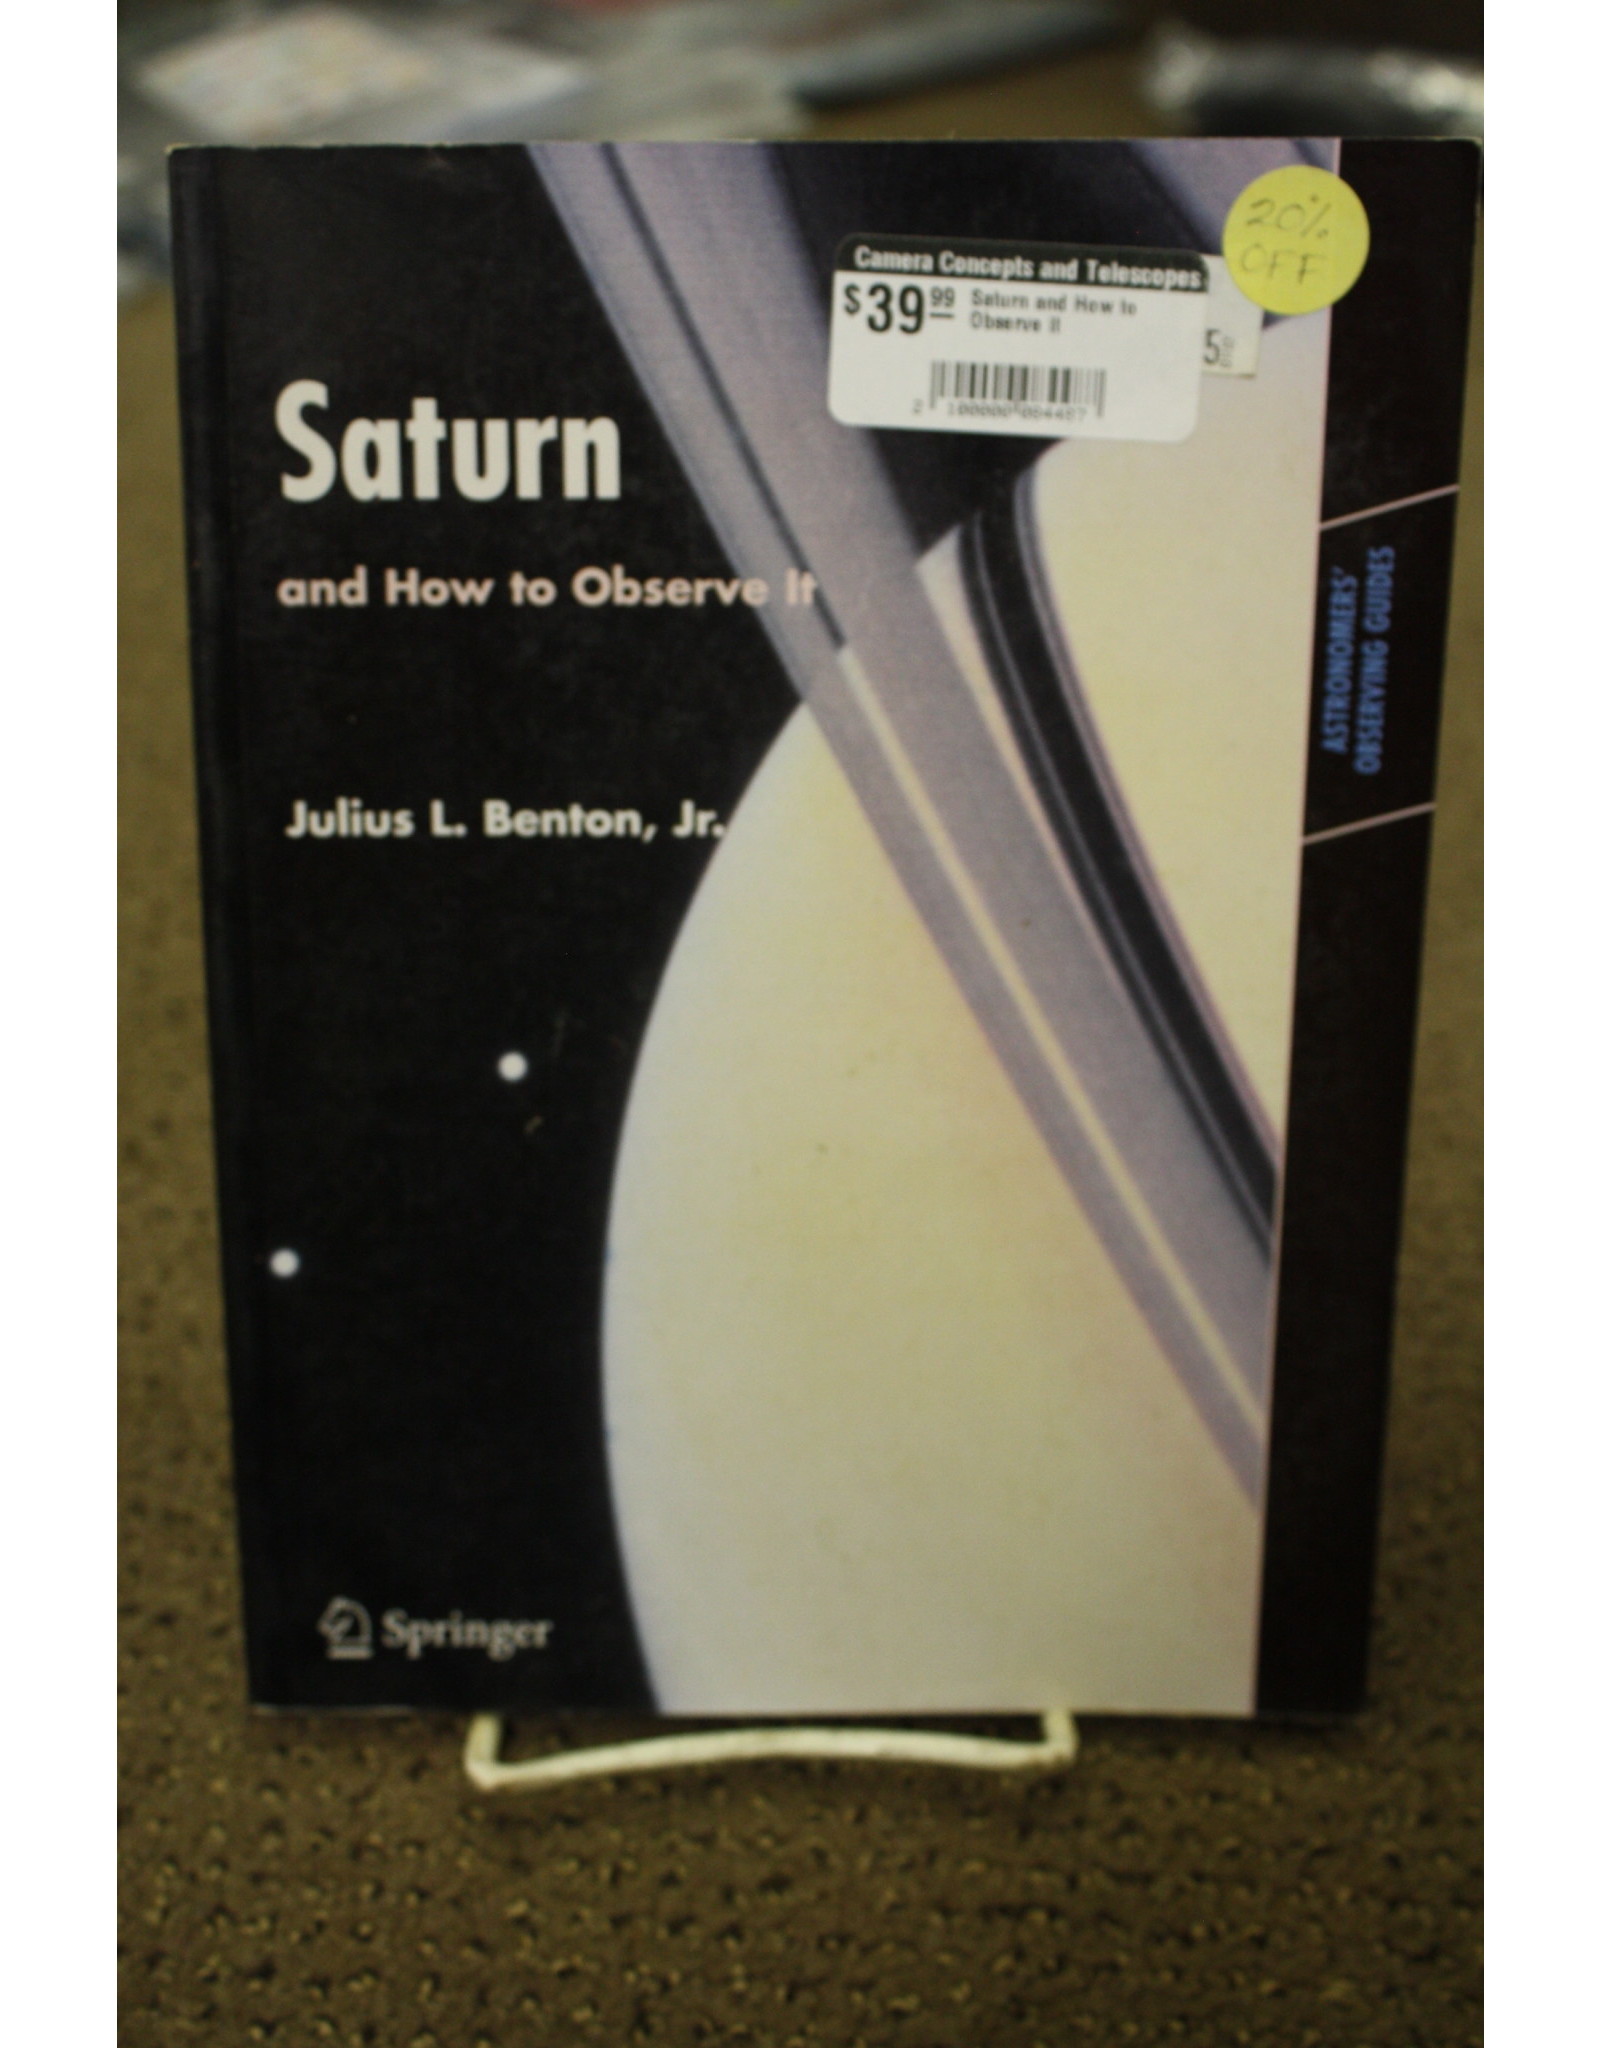 Saturn and How to Observe it